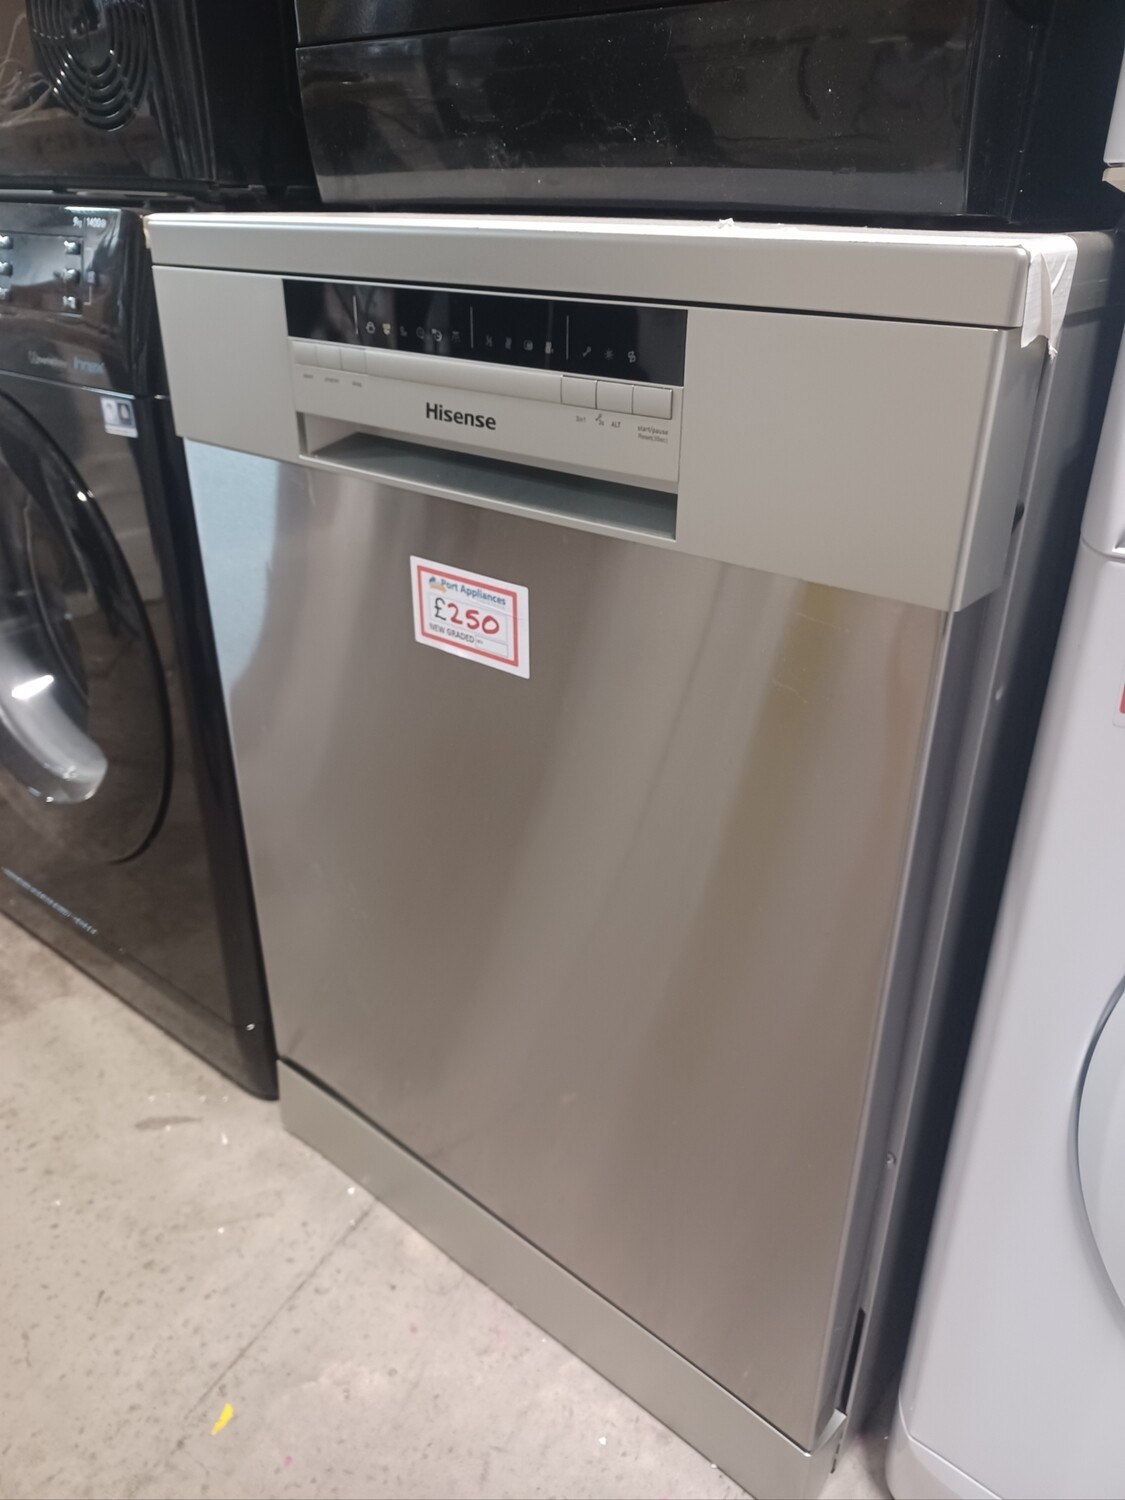 Hisense HS60240XUK 60cm Freestanding Full Size Dishwasher in Stainless Steel- New Graded + 12 Months Guarantee. This item is located in our Whitby Road Shop 